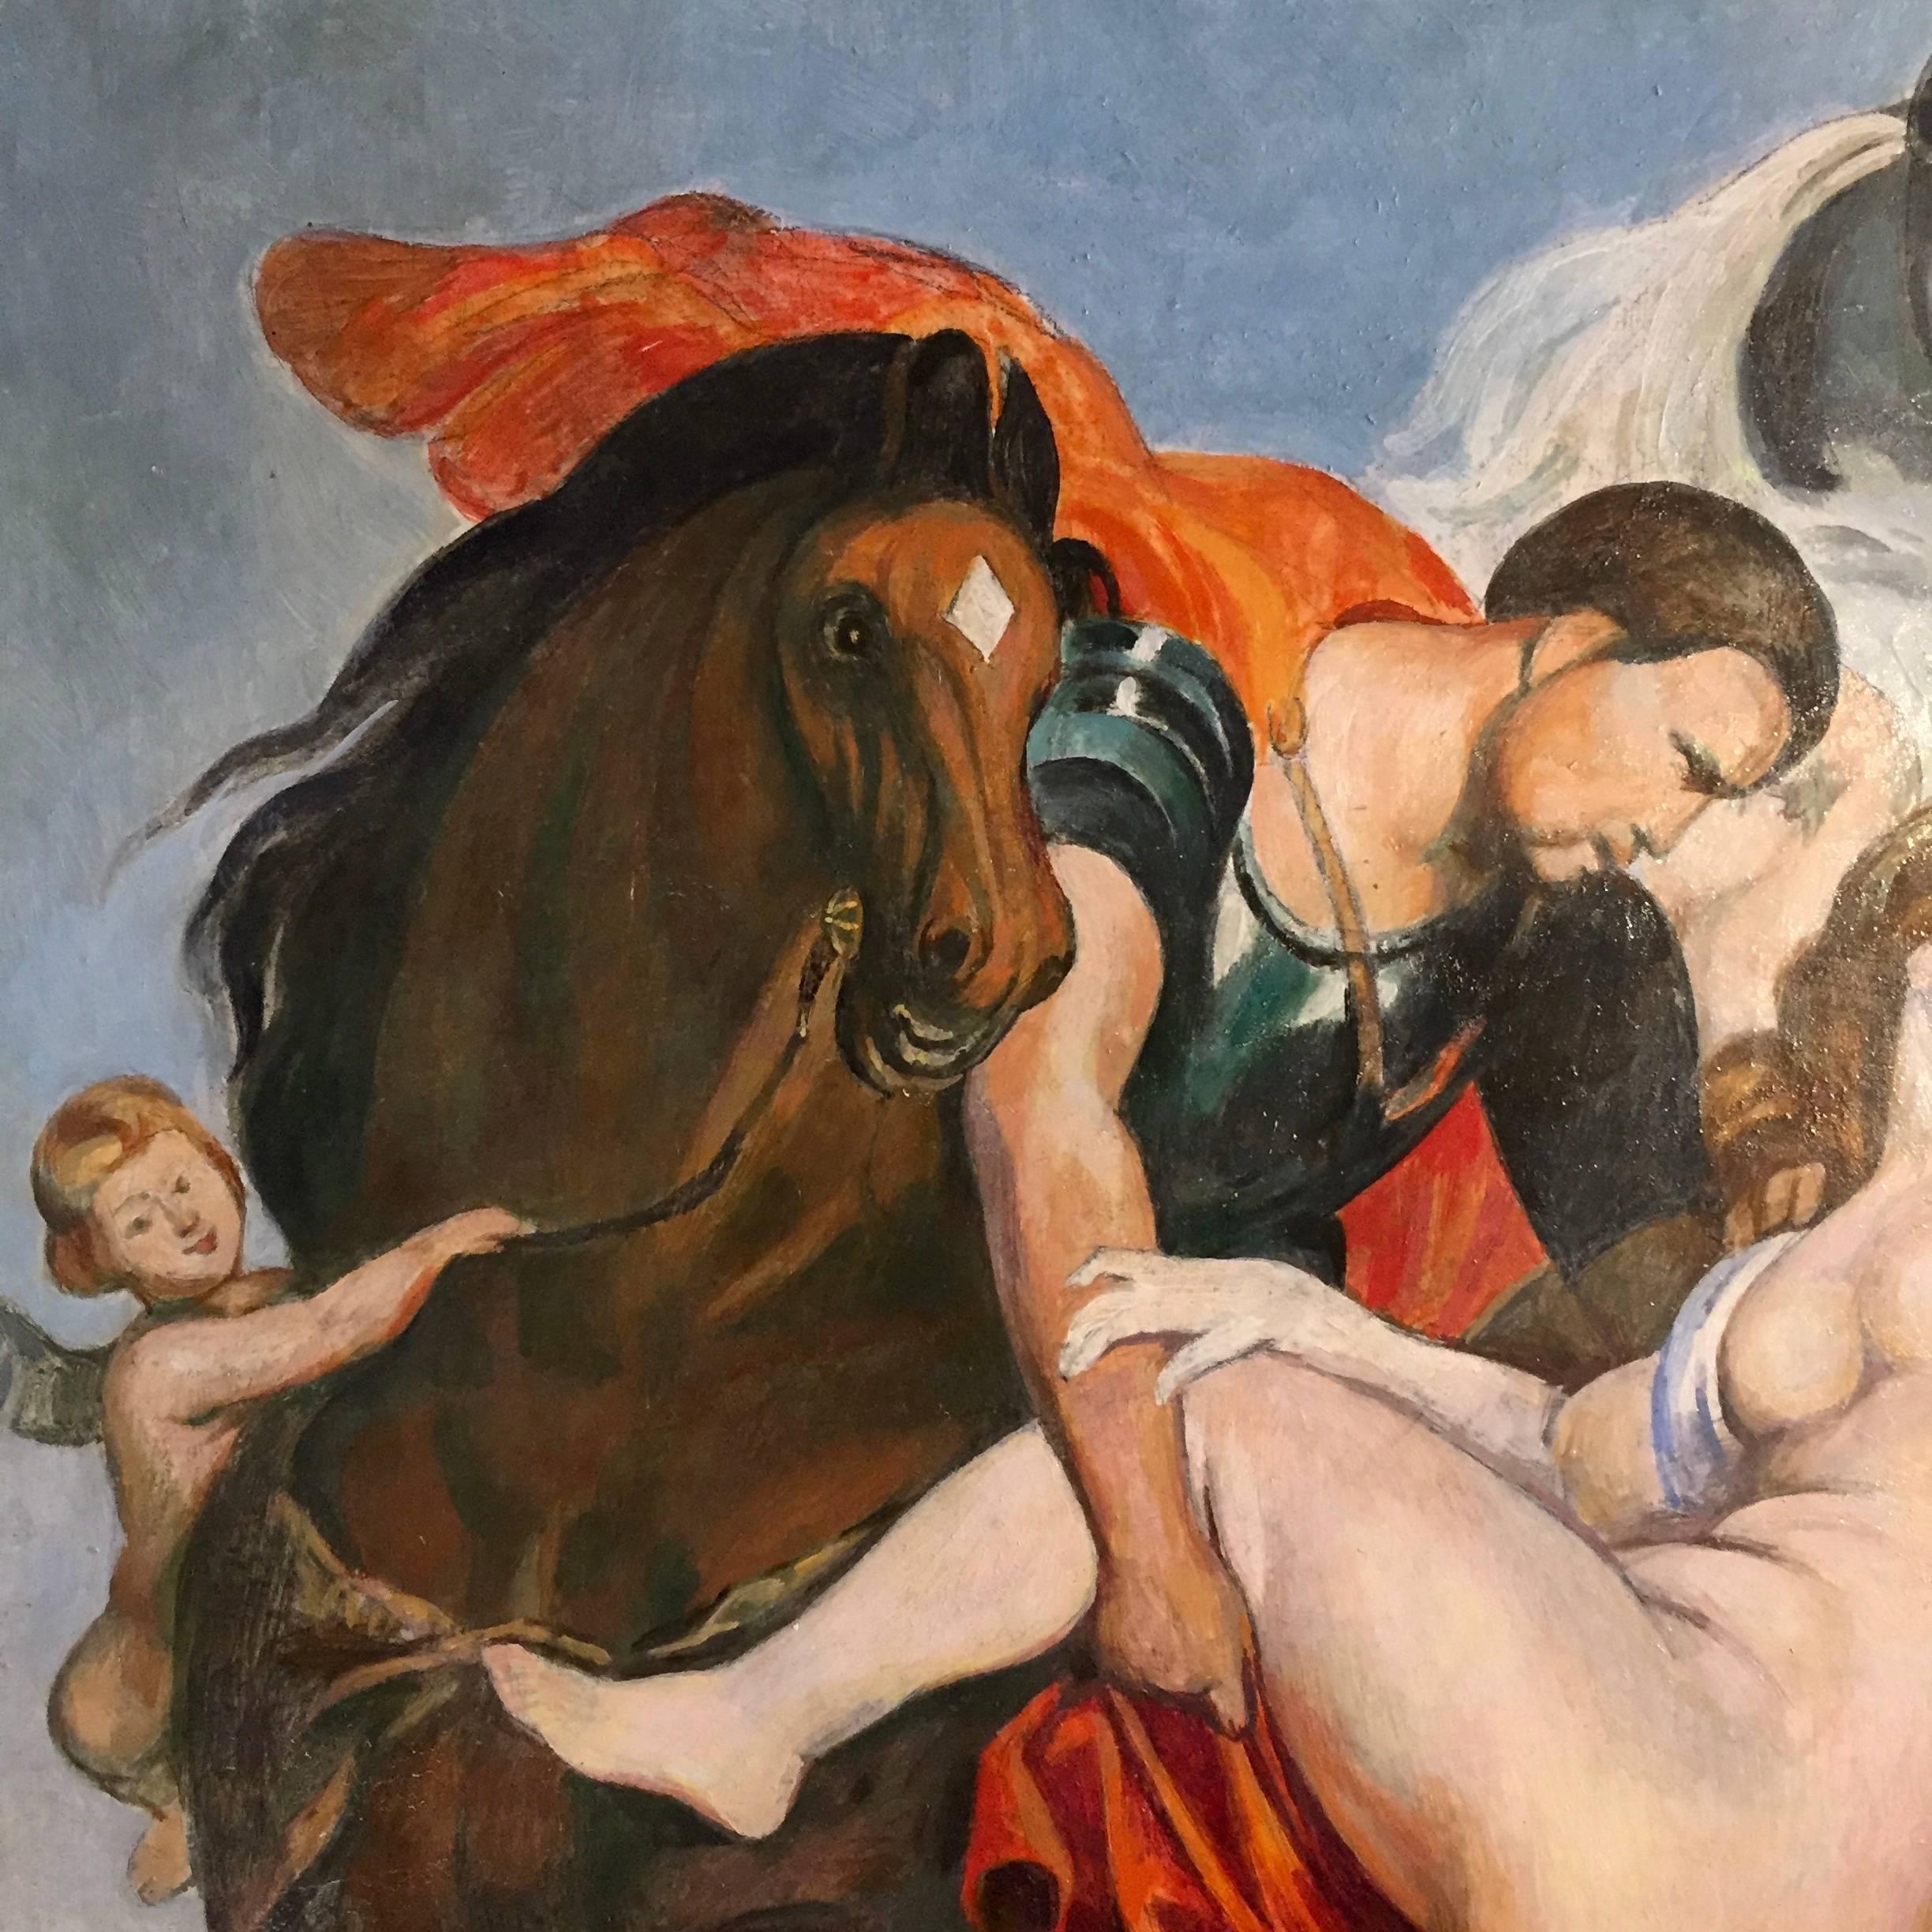 After Paul Rubens 1618 by Eric Nordlöw, Leukippos Daughters, 1977 In Good Condition For Sale In Hudson, NY